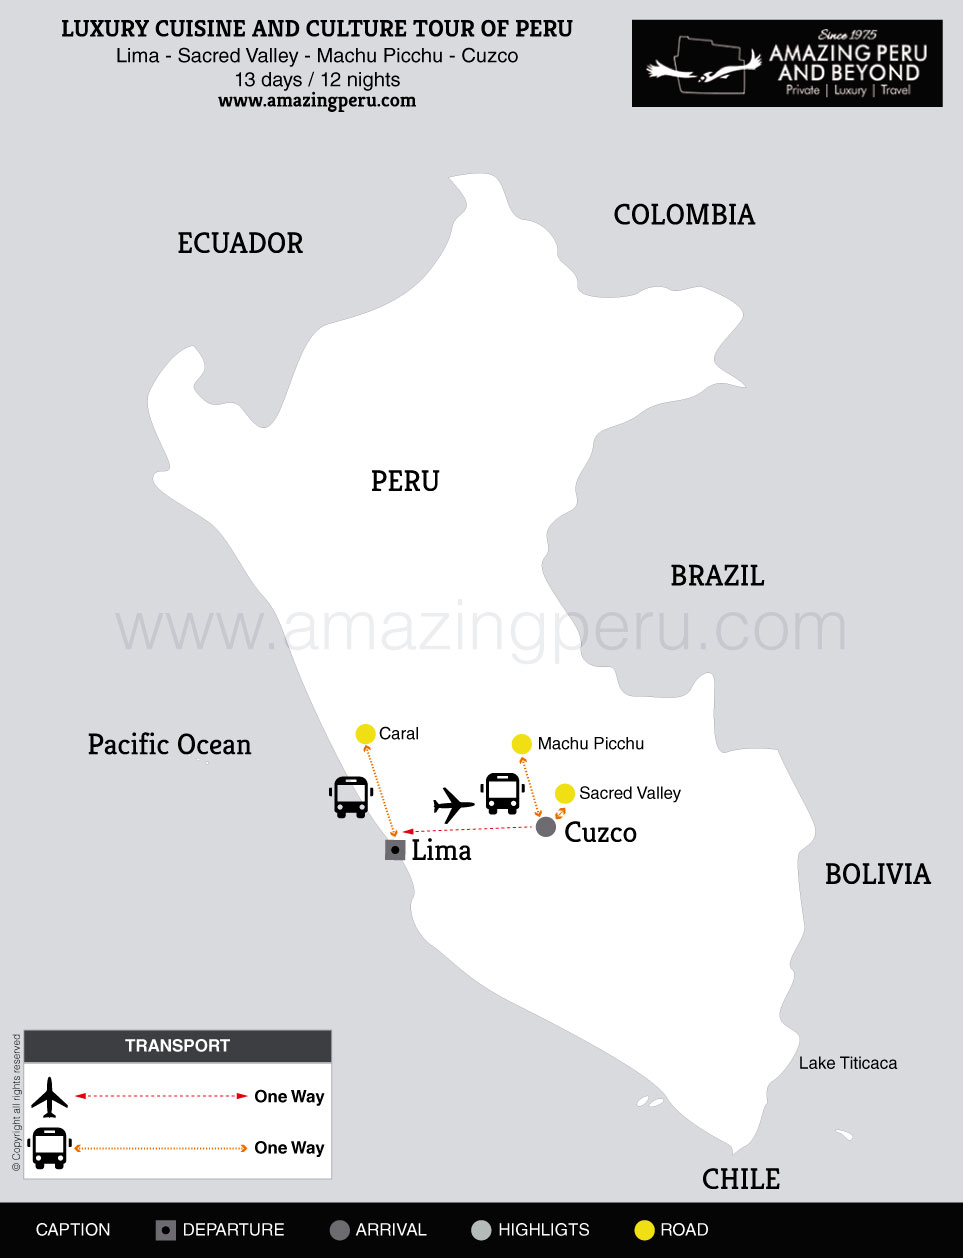 2022 Luxury Cuisine and Culture Tour of Peru - 13 days / 12 nights.